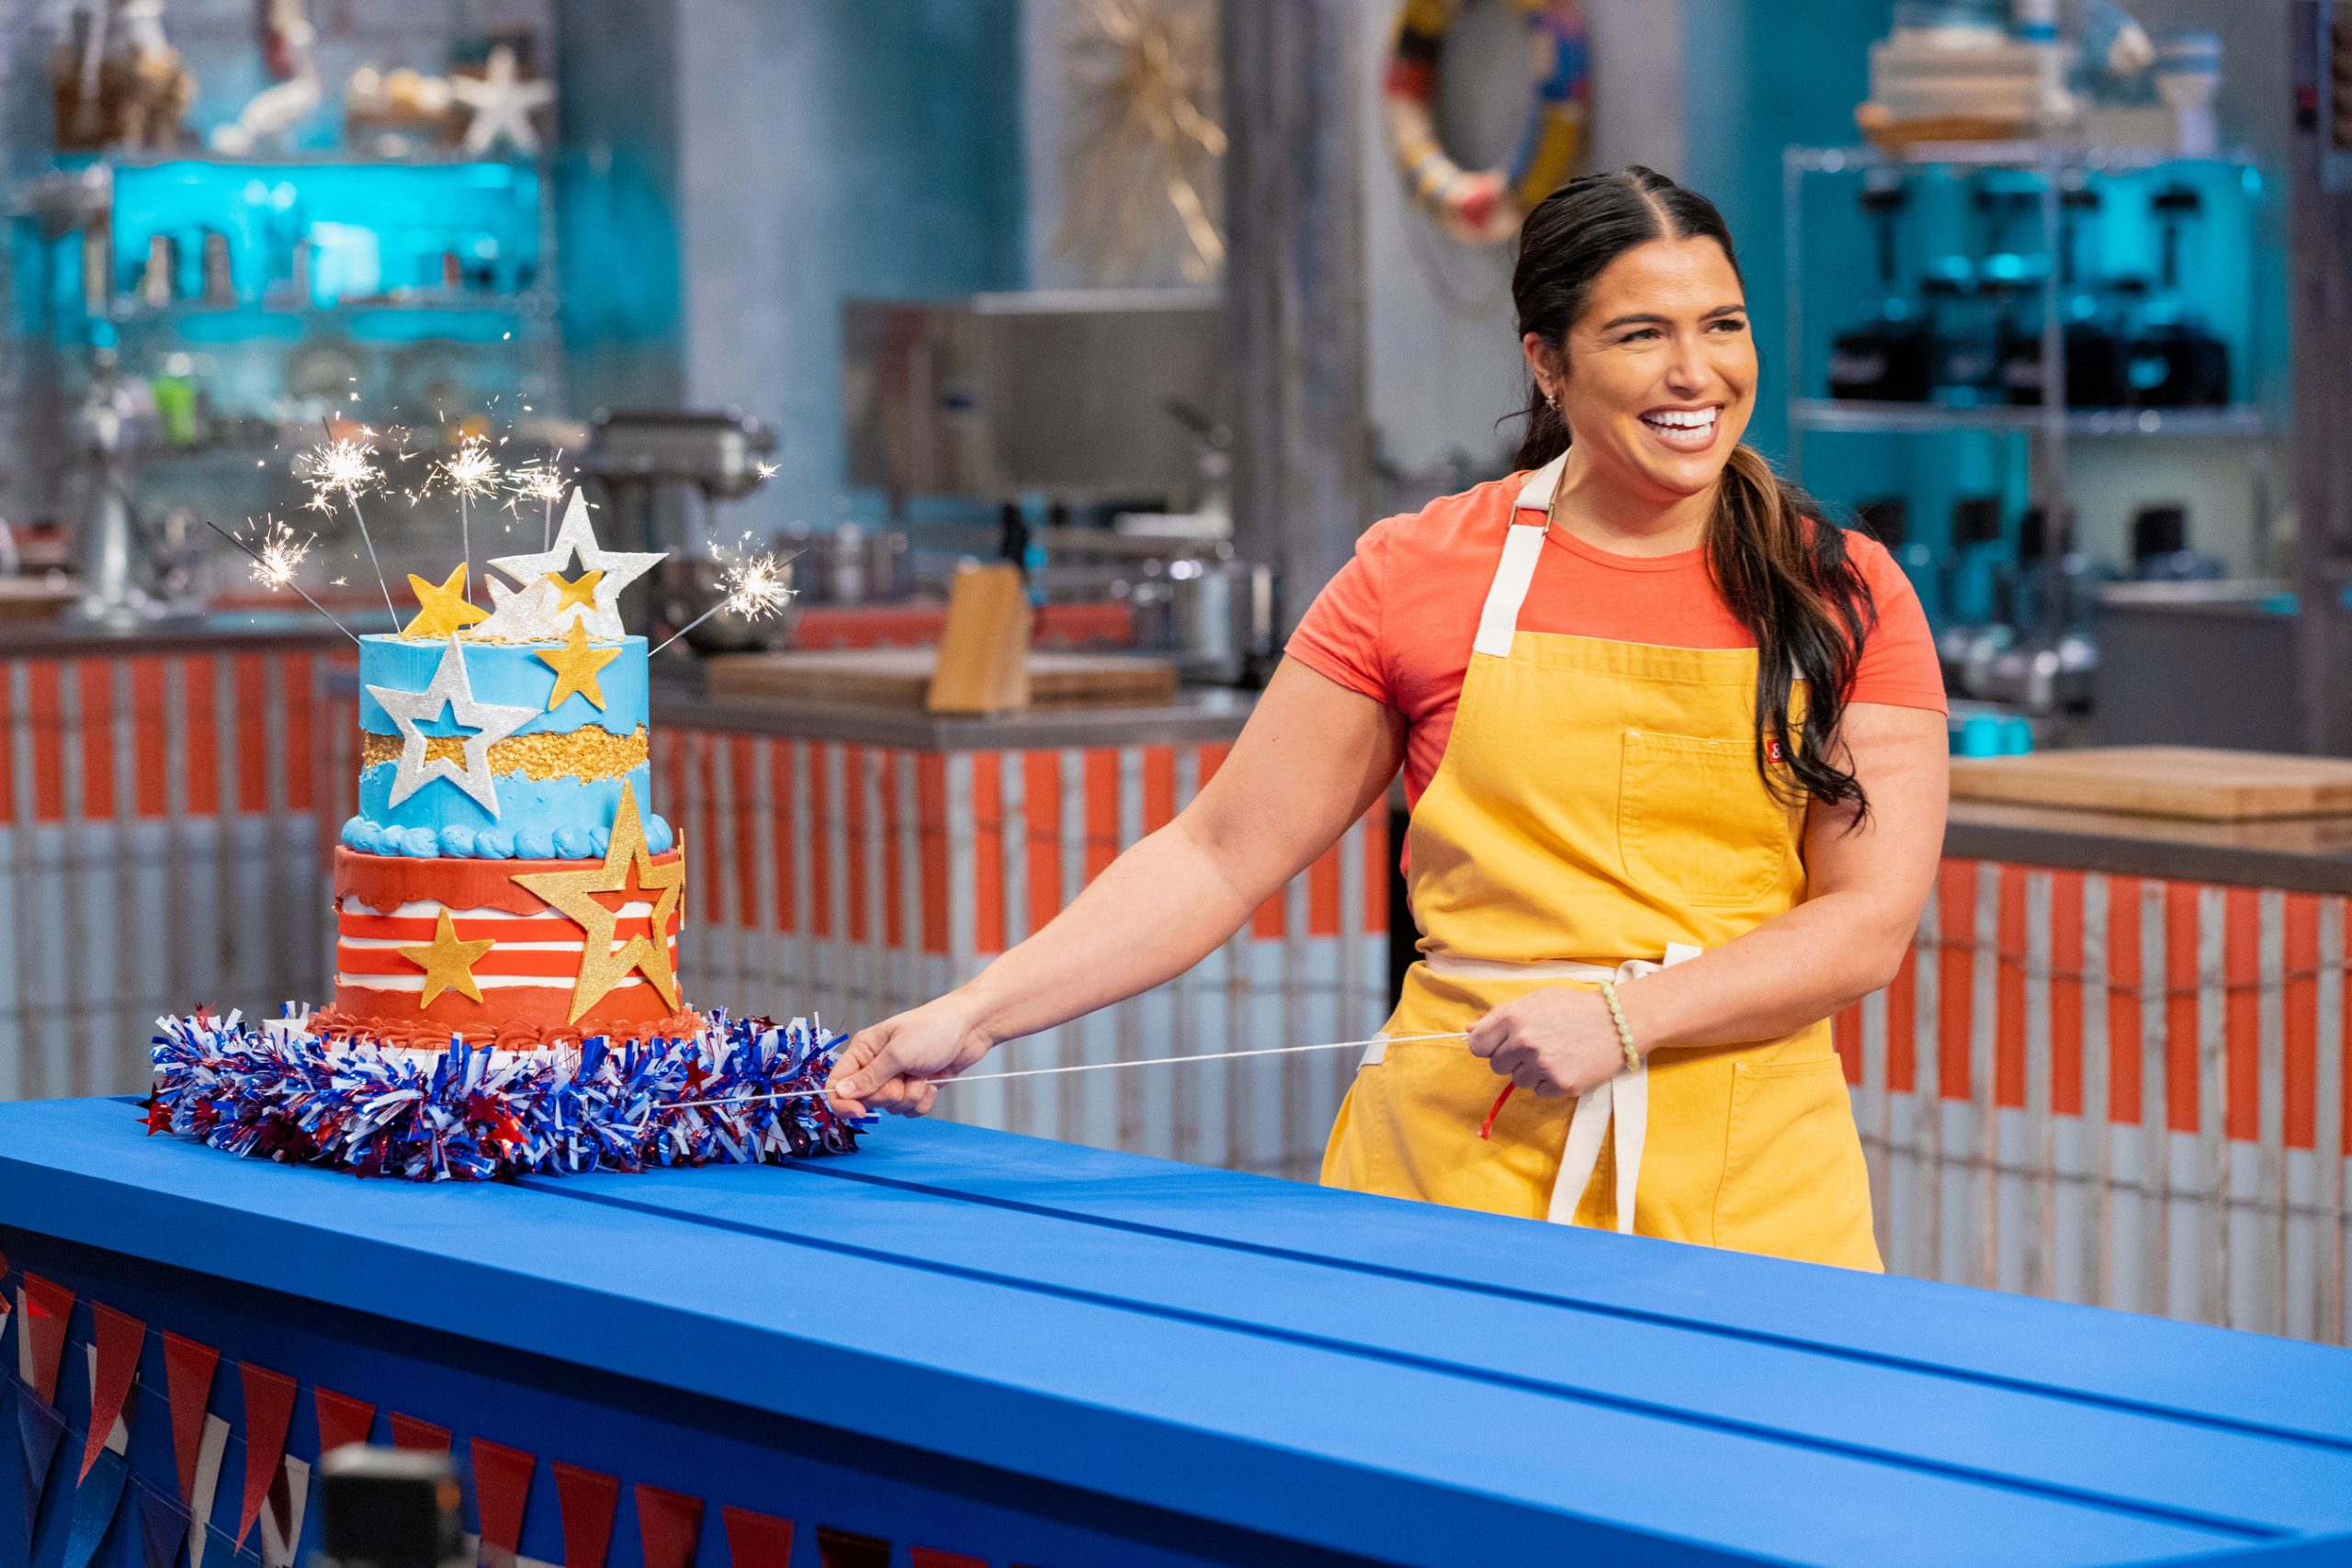 Pittsburgher Zoe Peckich wins 'Summer Baking Championship'